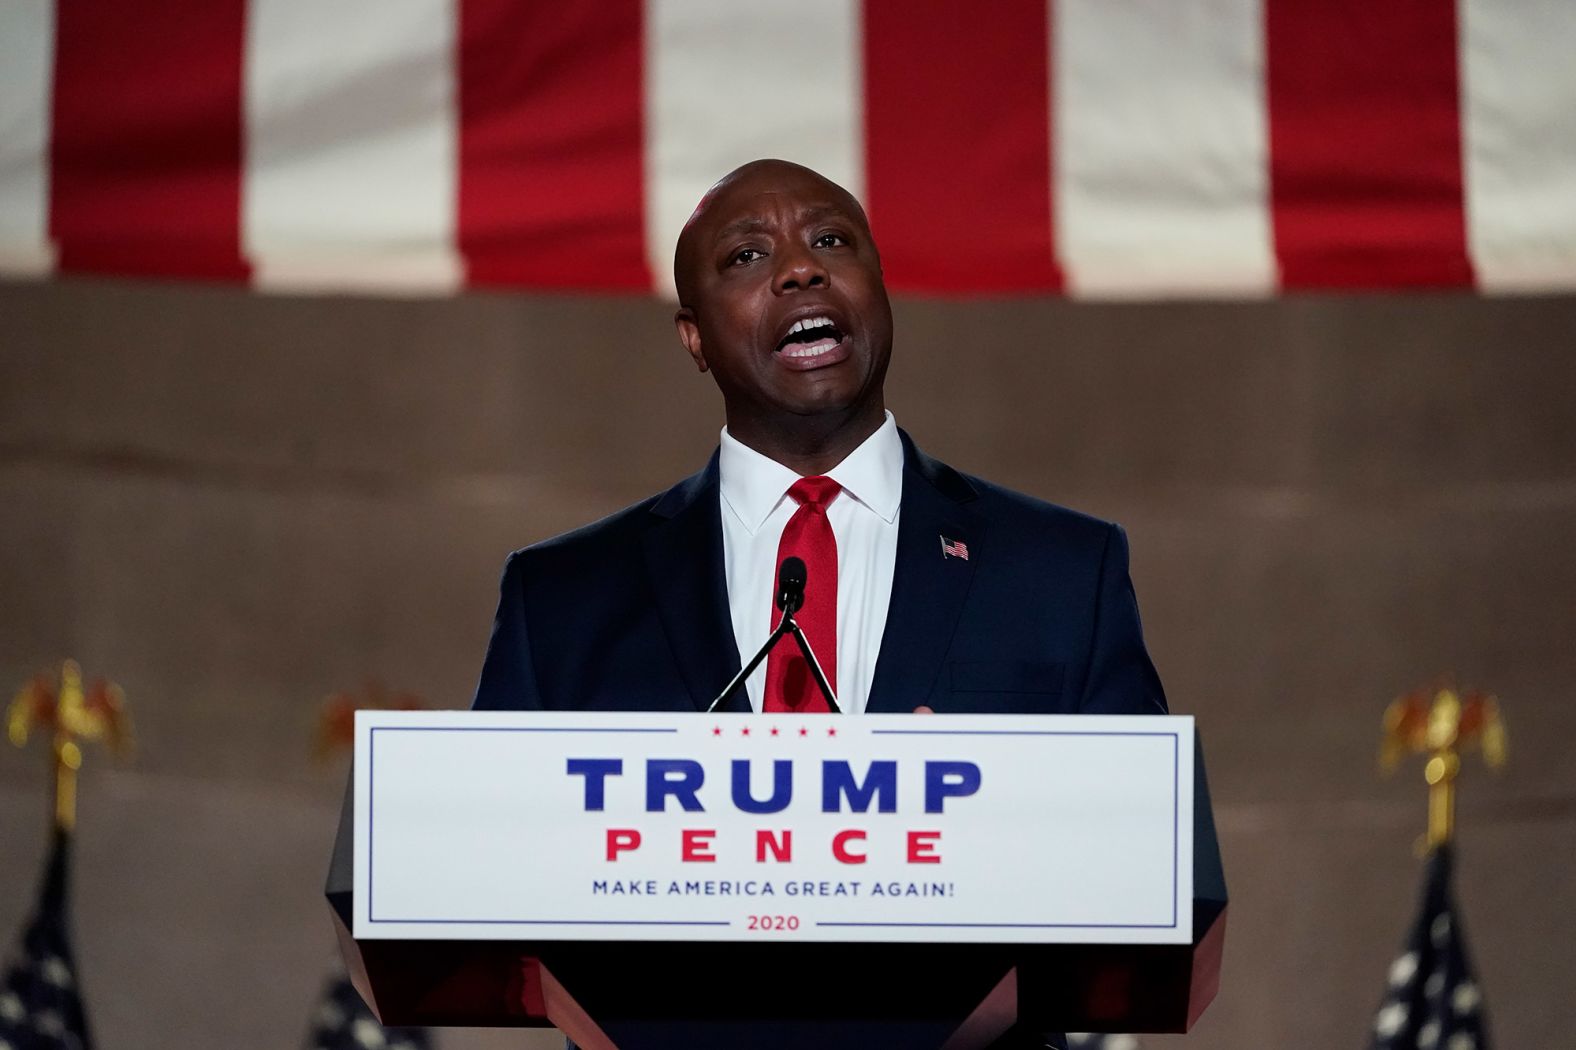 US Sen. Tim Scott delivers the closing speech Monday on the first night of the convention. The South Carolina lawmaker argued that Joe Biden has taken Black voters for granted. Scott, who has called some of the President's tweets "indefensible" and "racially offensive," <a href="index.php?page=&url=https%3A%2F%2Fwww.cnn.com%2Fpolitics%2Flive-news%2Frnc-2020-day-1%2Fh_edba03315b5b836fcdbbc5922f91e072" target="_blank">also criticized cancel culture</a> and boasted the economic opportunities for minorities he said were made possible by Trump and the Republican agenda.